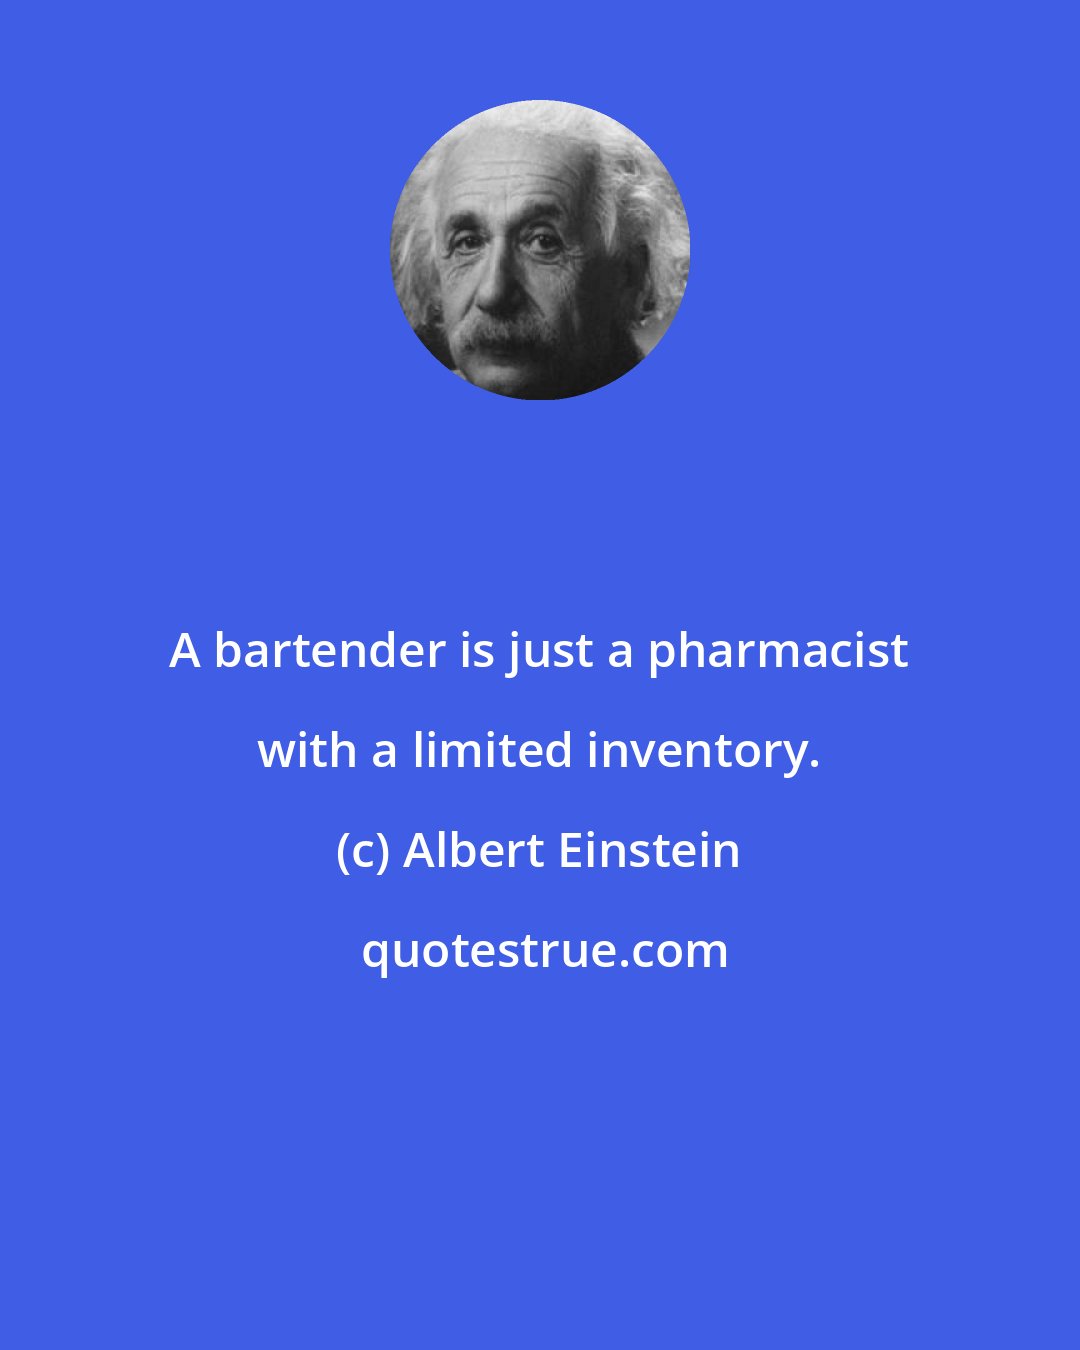 Albert Einstein: A bartender is just a pharmacist with a limited inventory.